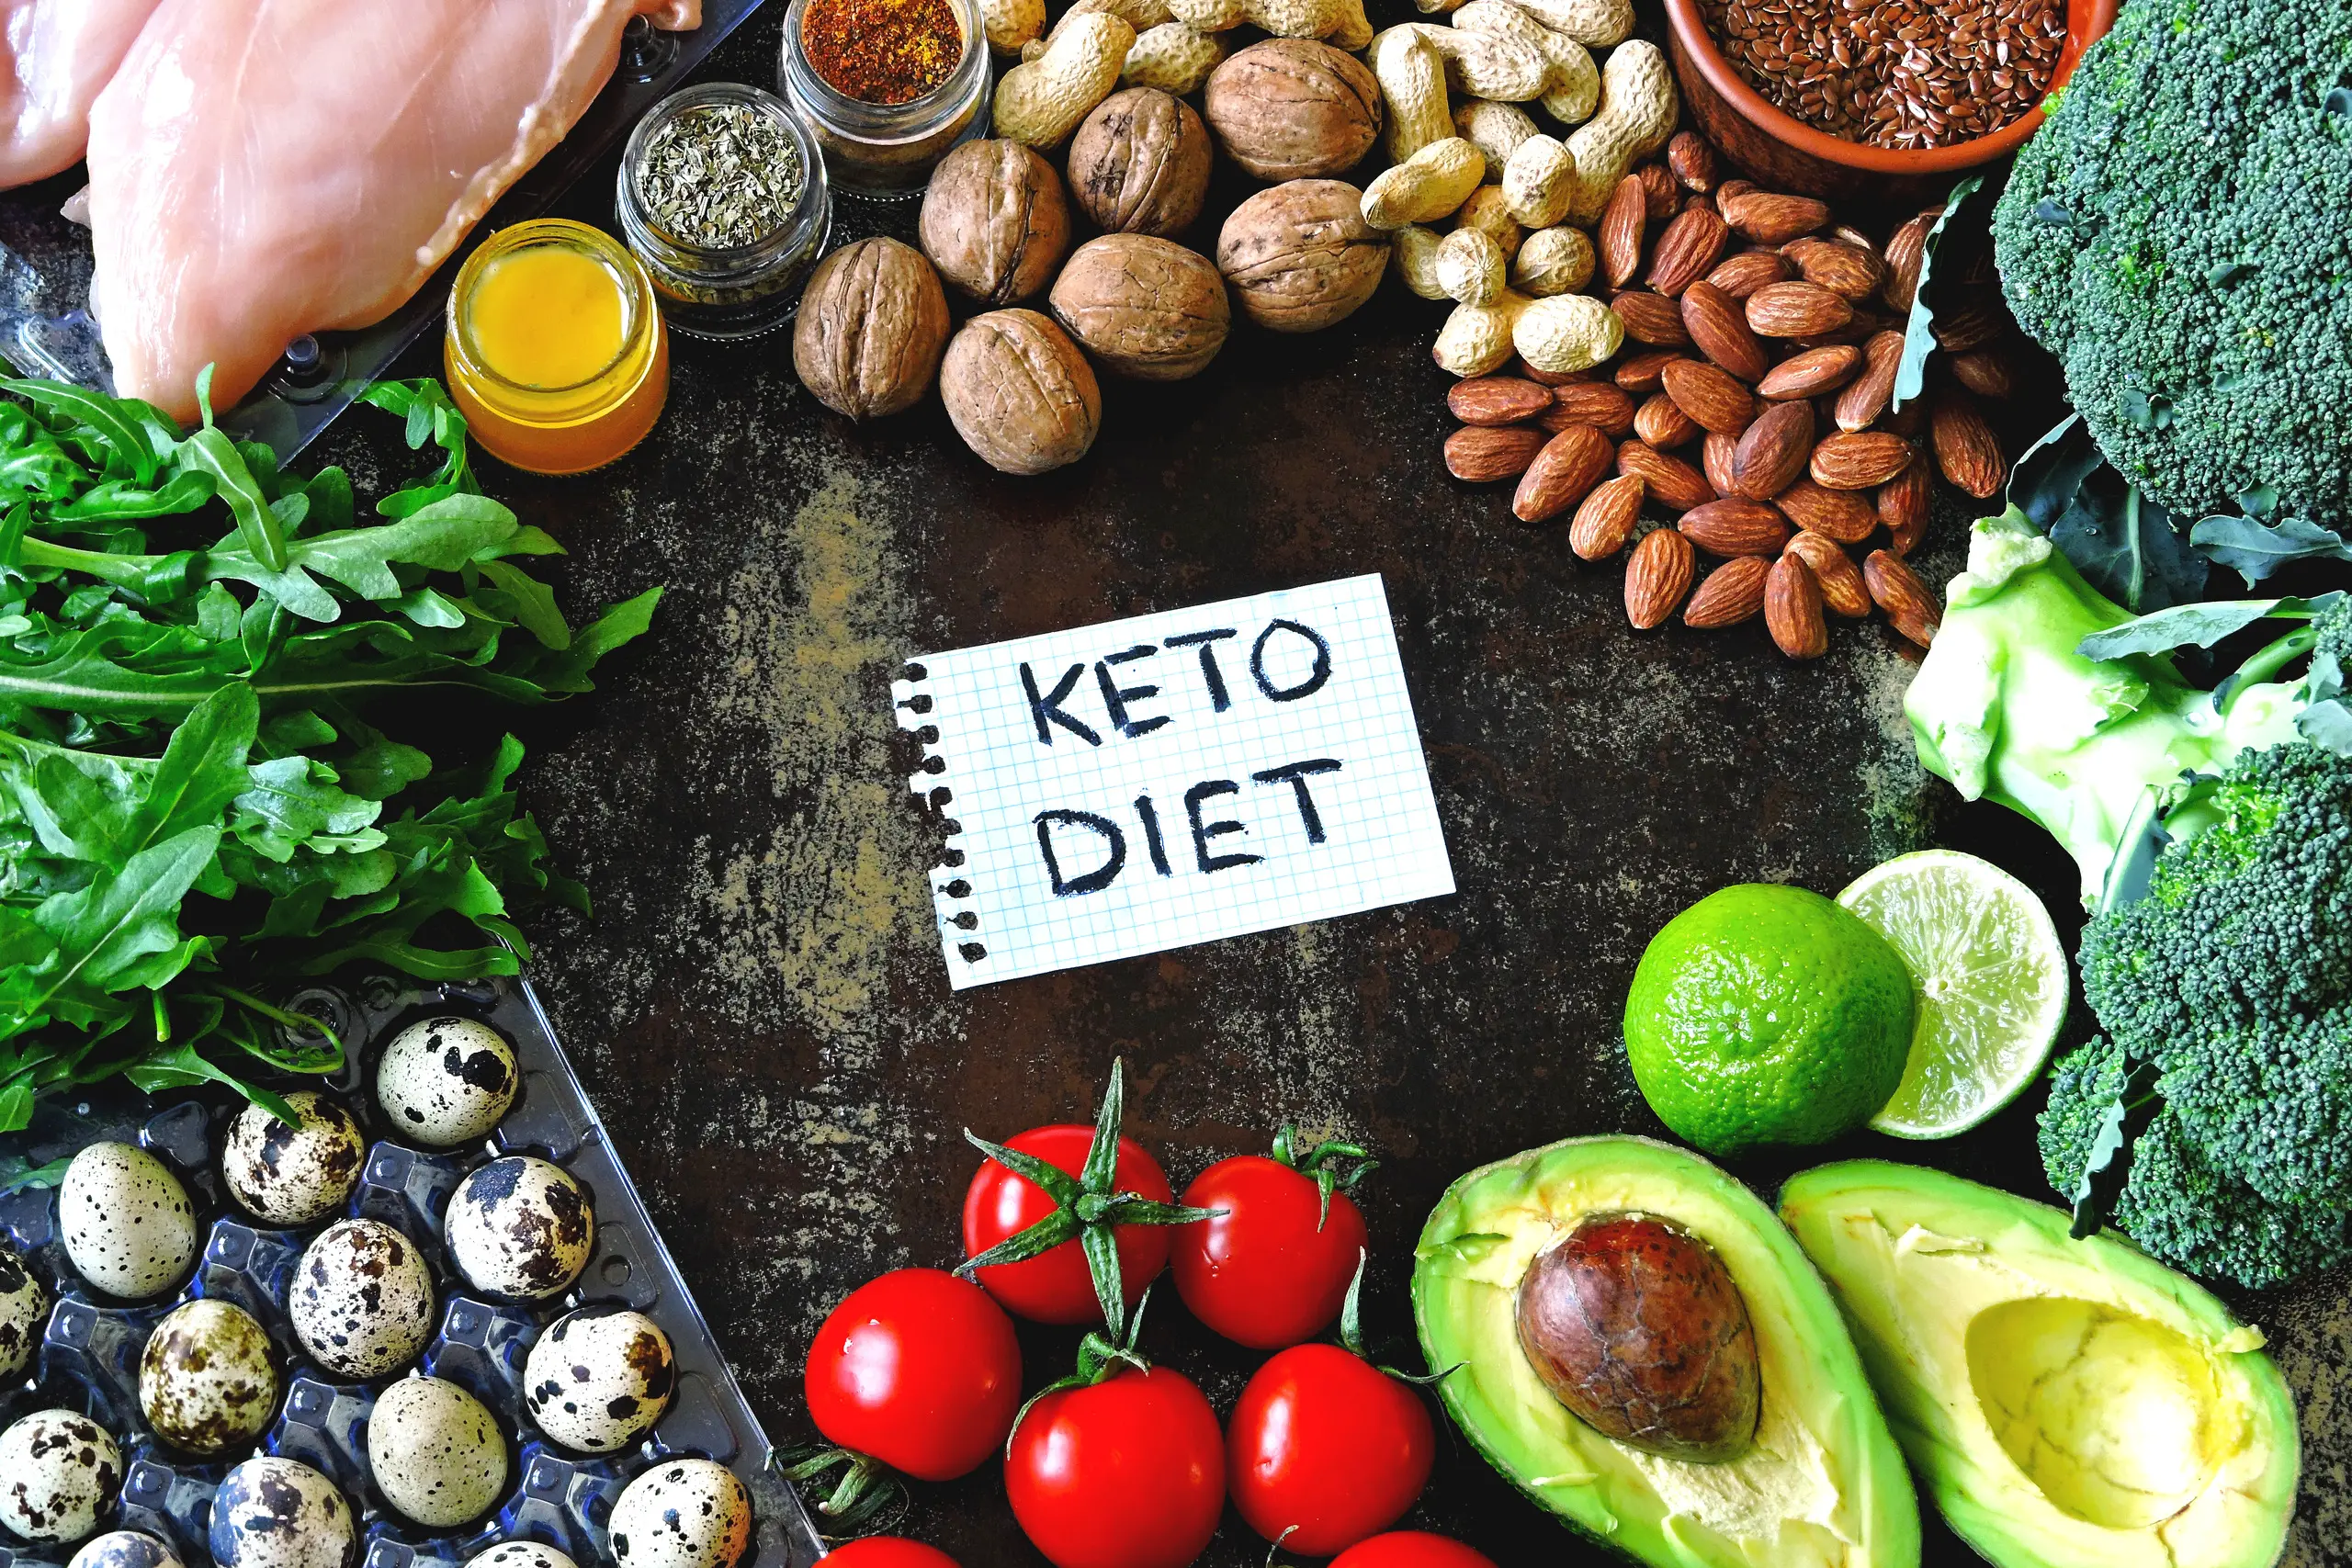 Keto Diet: Know This Before You Consider It